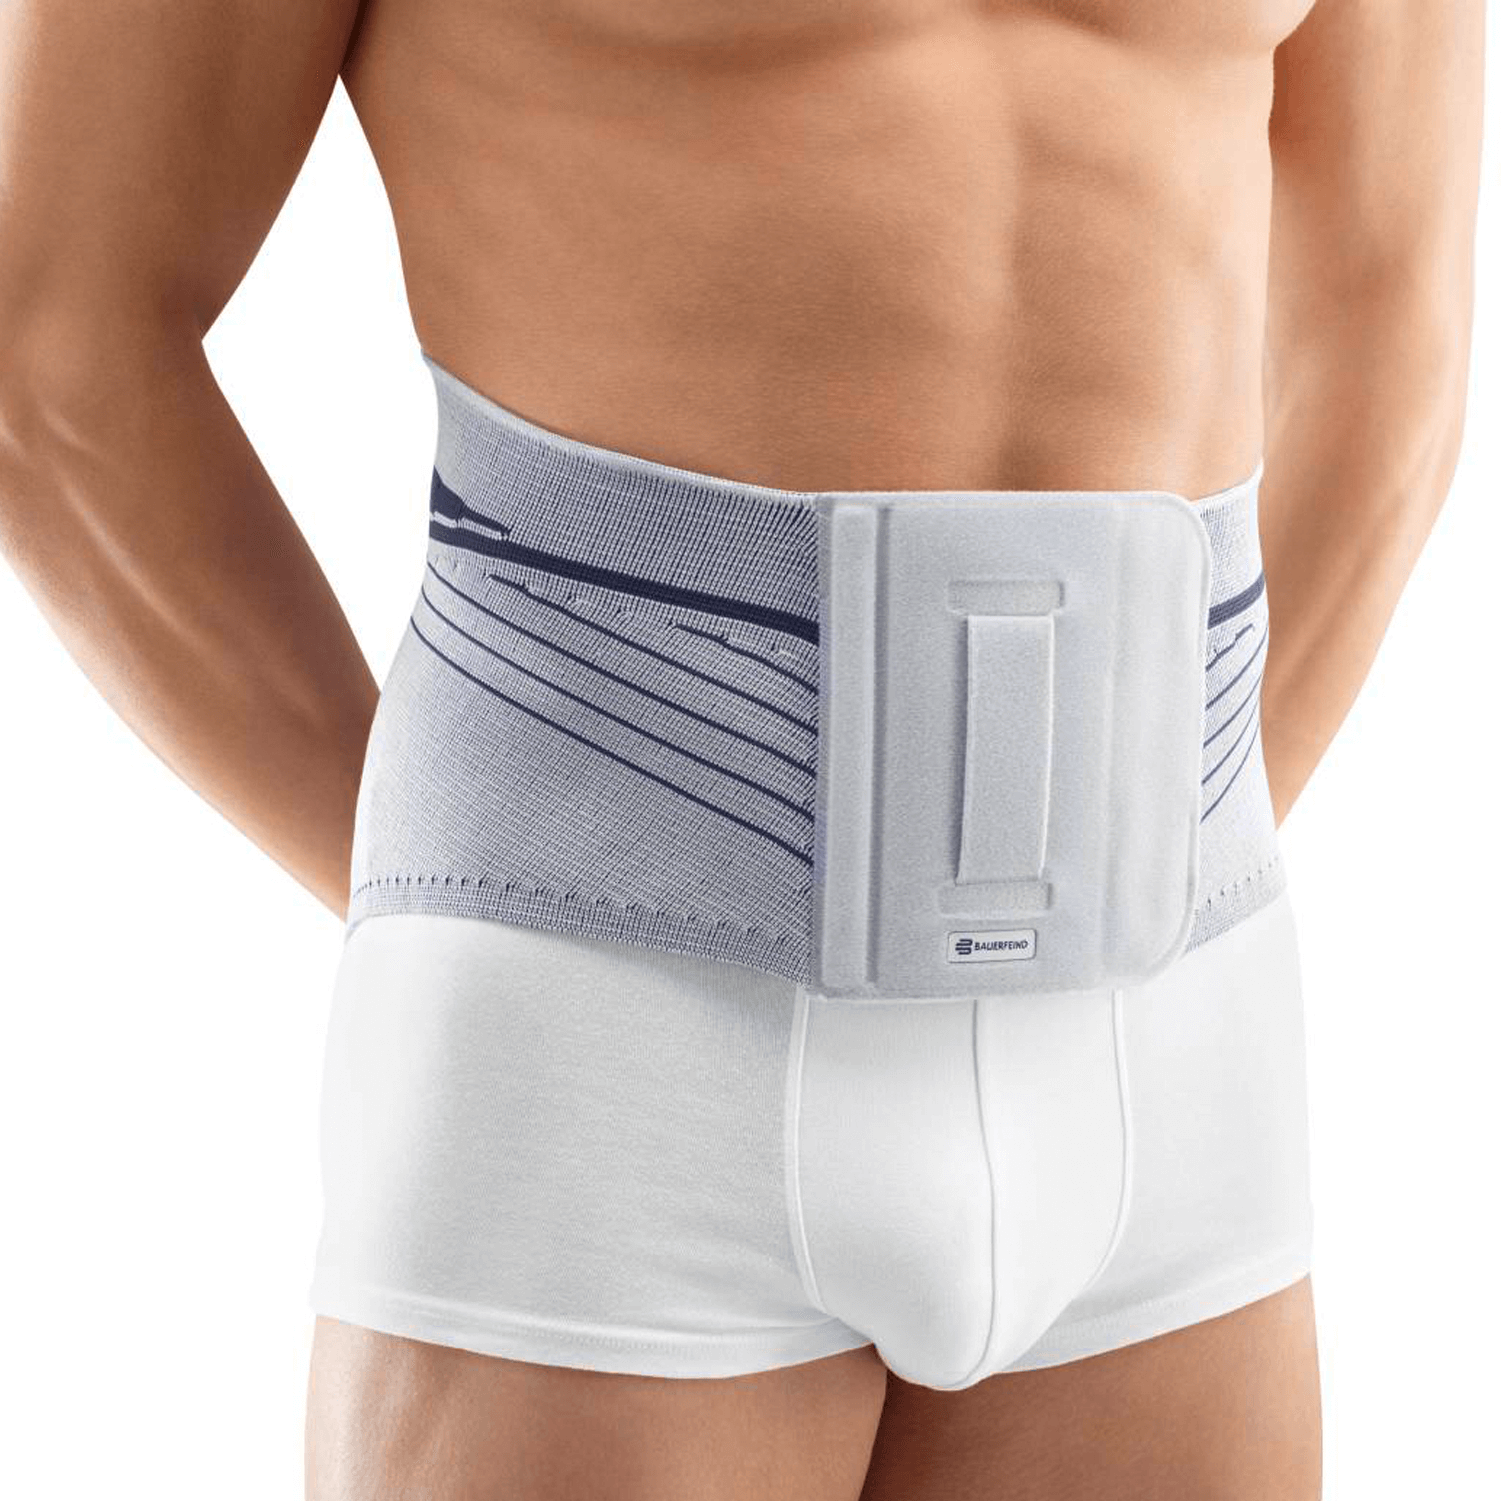 Back Brace with Support, Joint and Muscle Protection